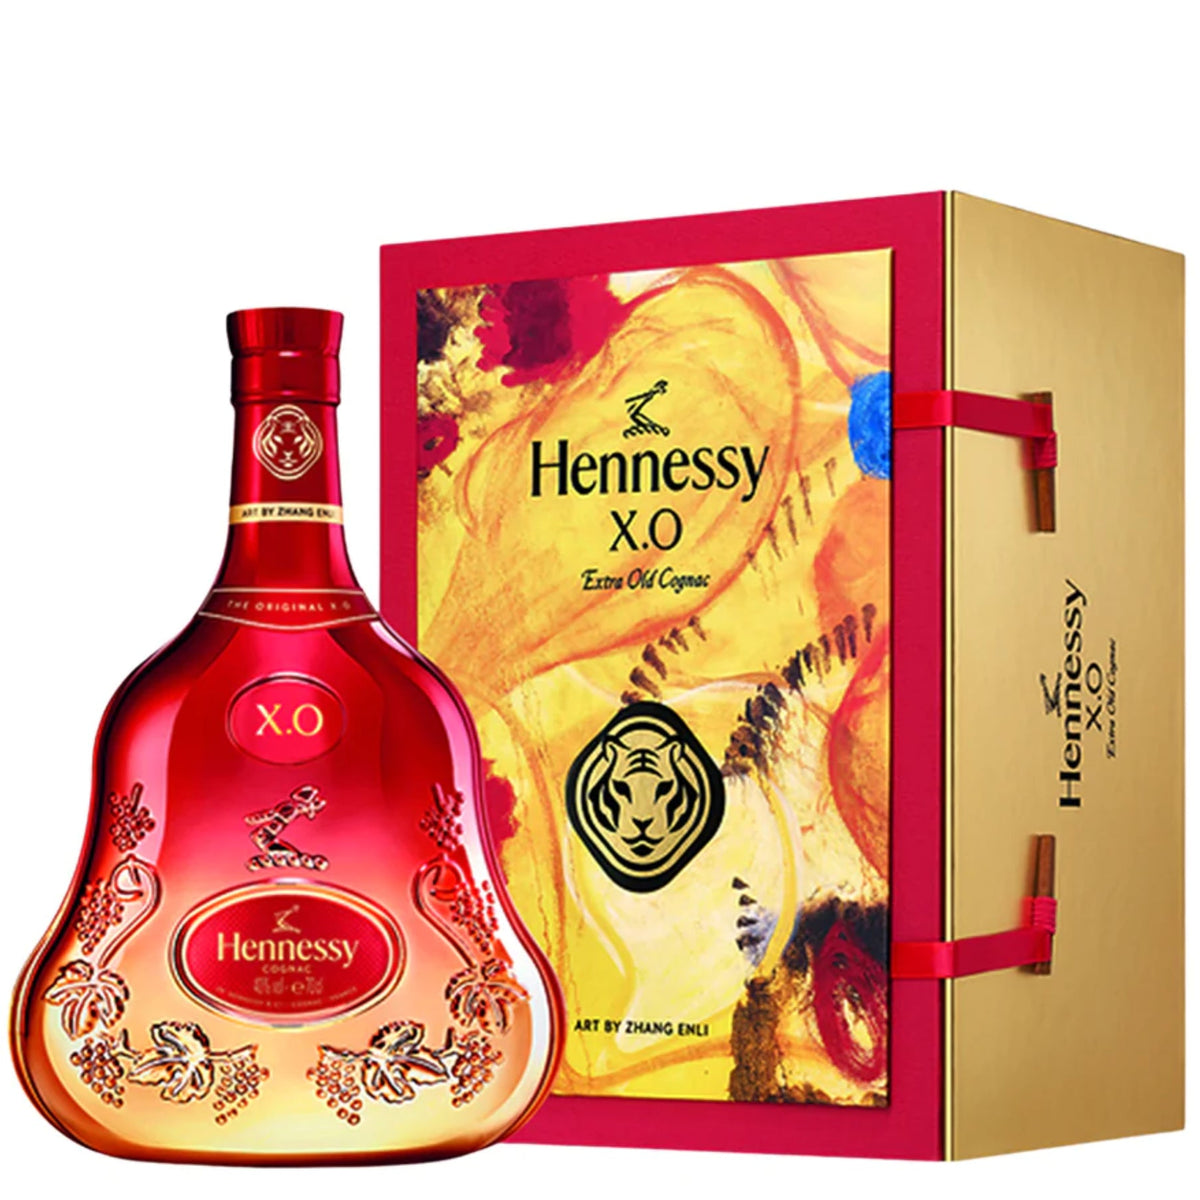 Hennessy V.S.O.P Limited Edition by Maluma (Collector's Edition)